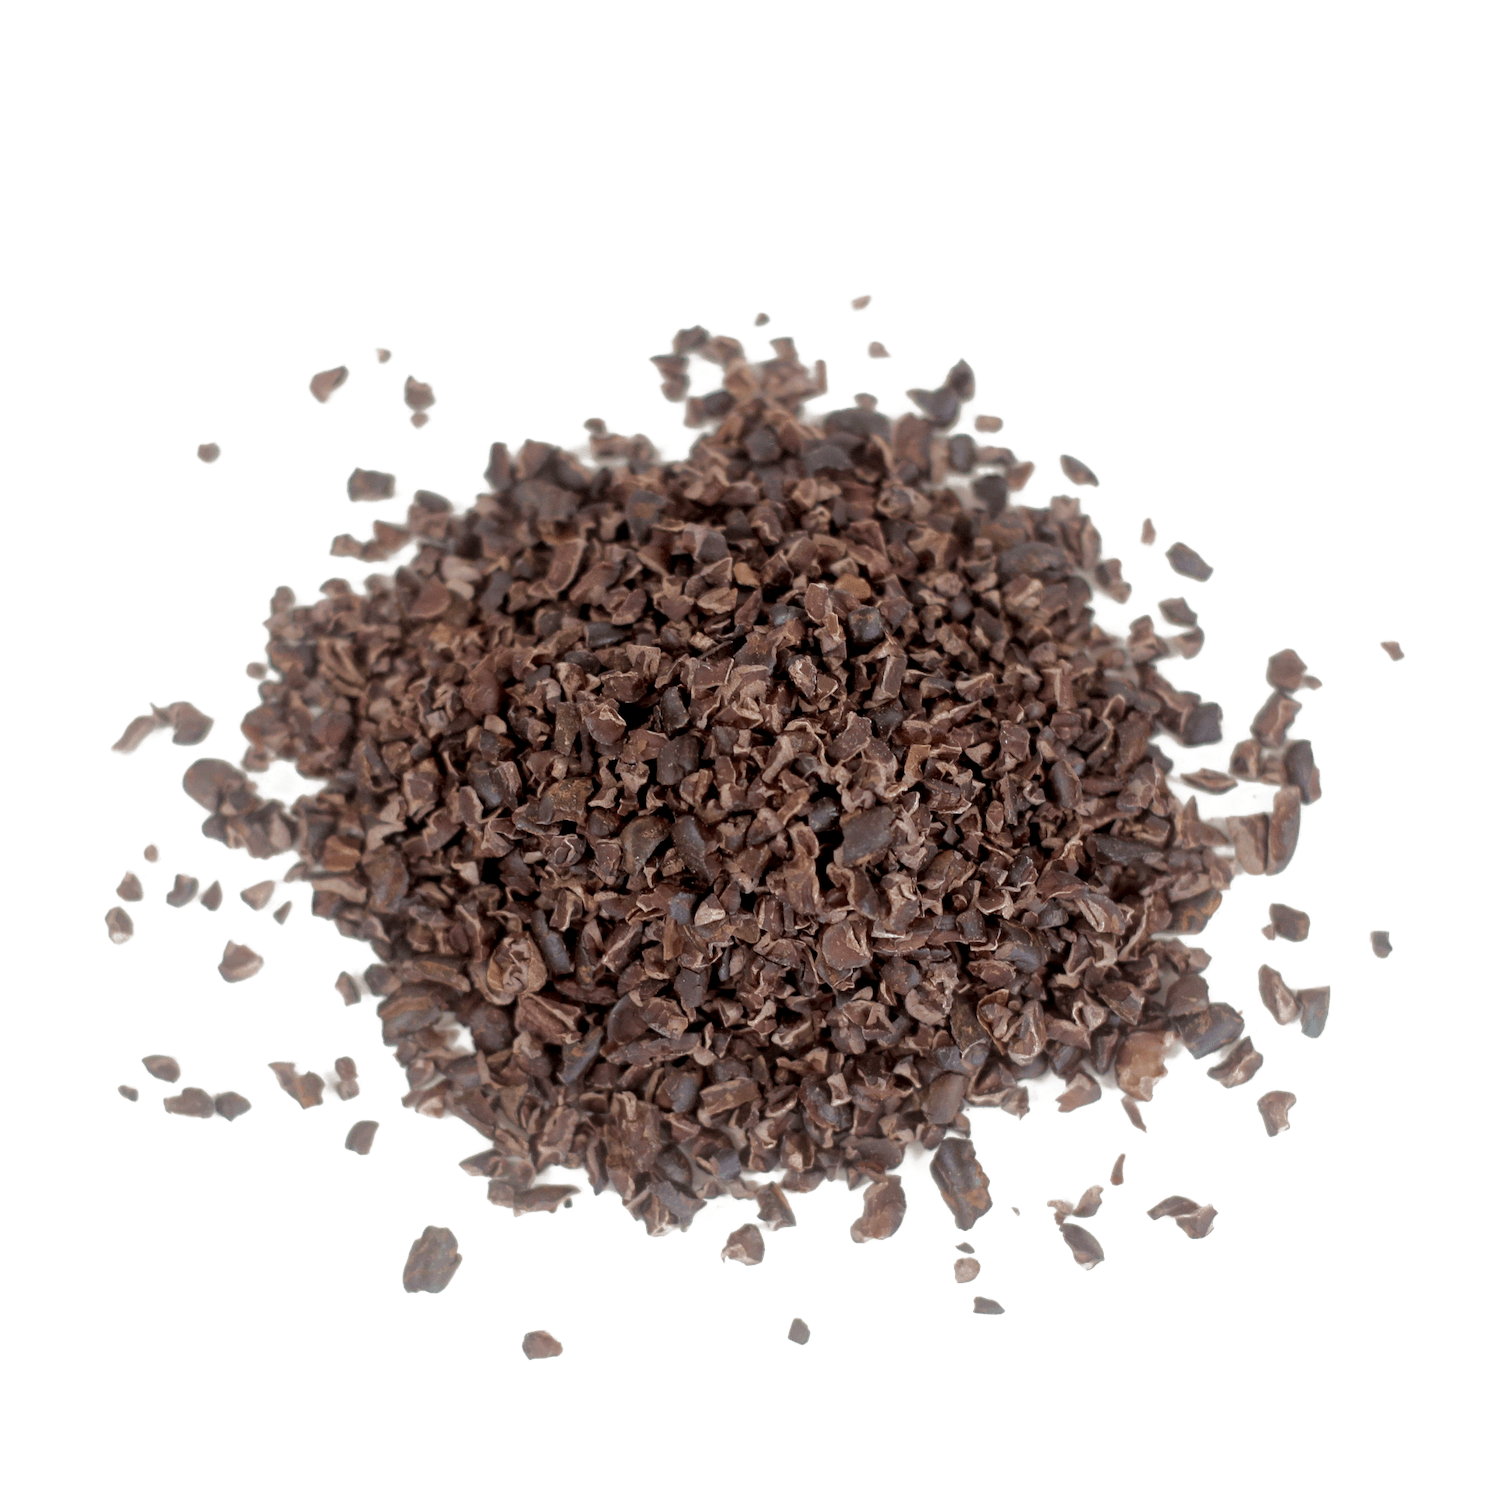 Image of pile of cacao nibs